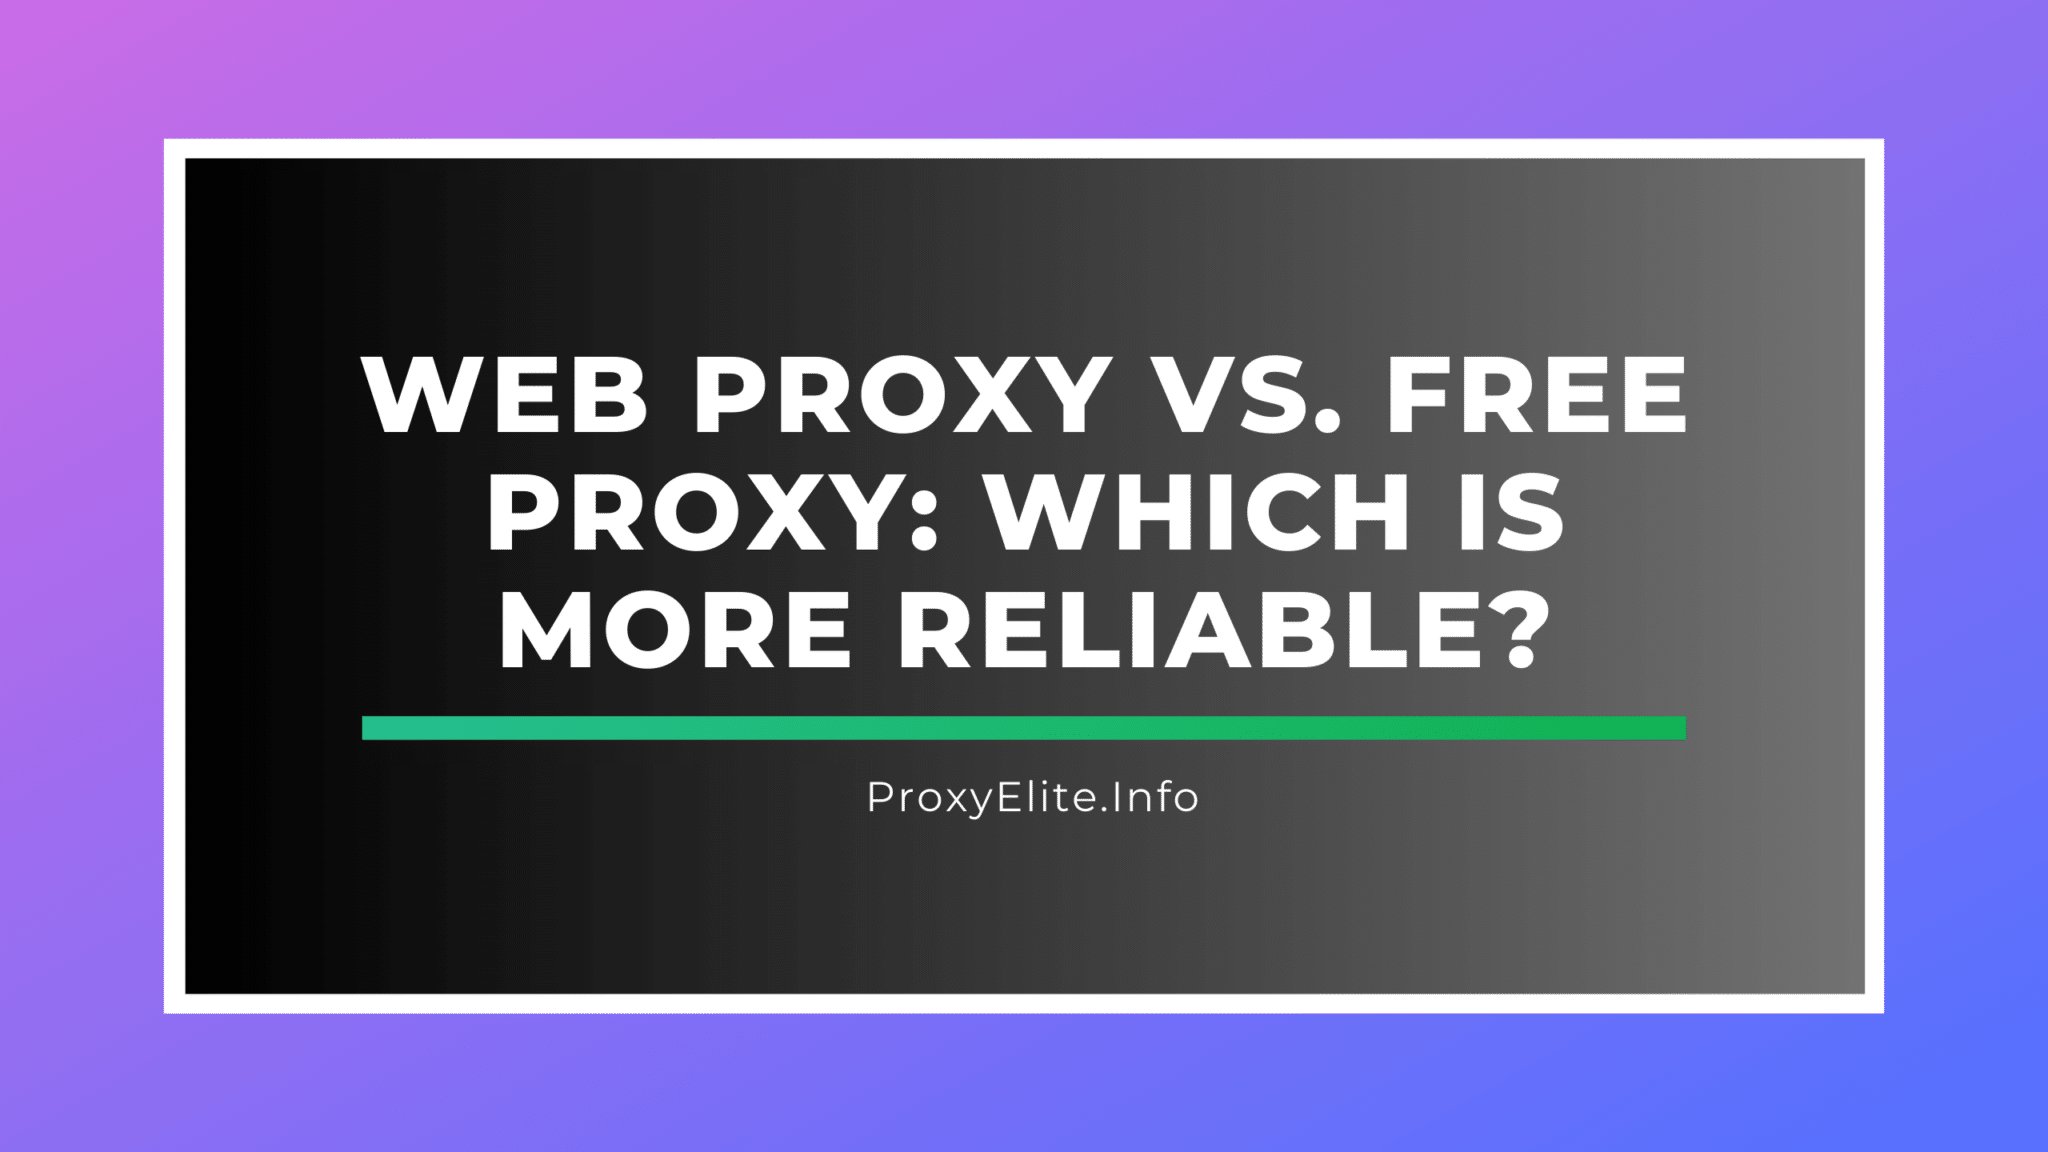 Web Proxy vs. Free Proxy: Which is More Reliable?